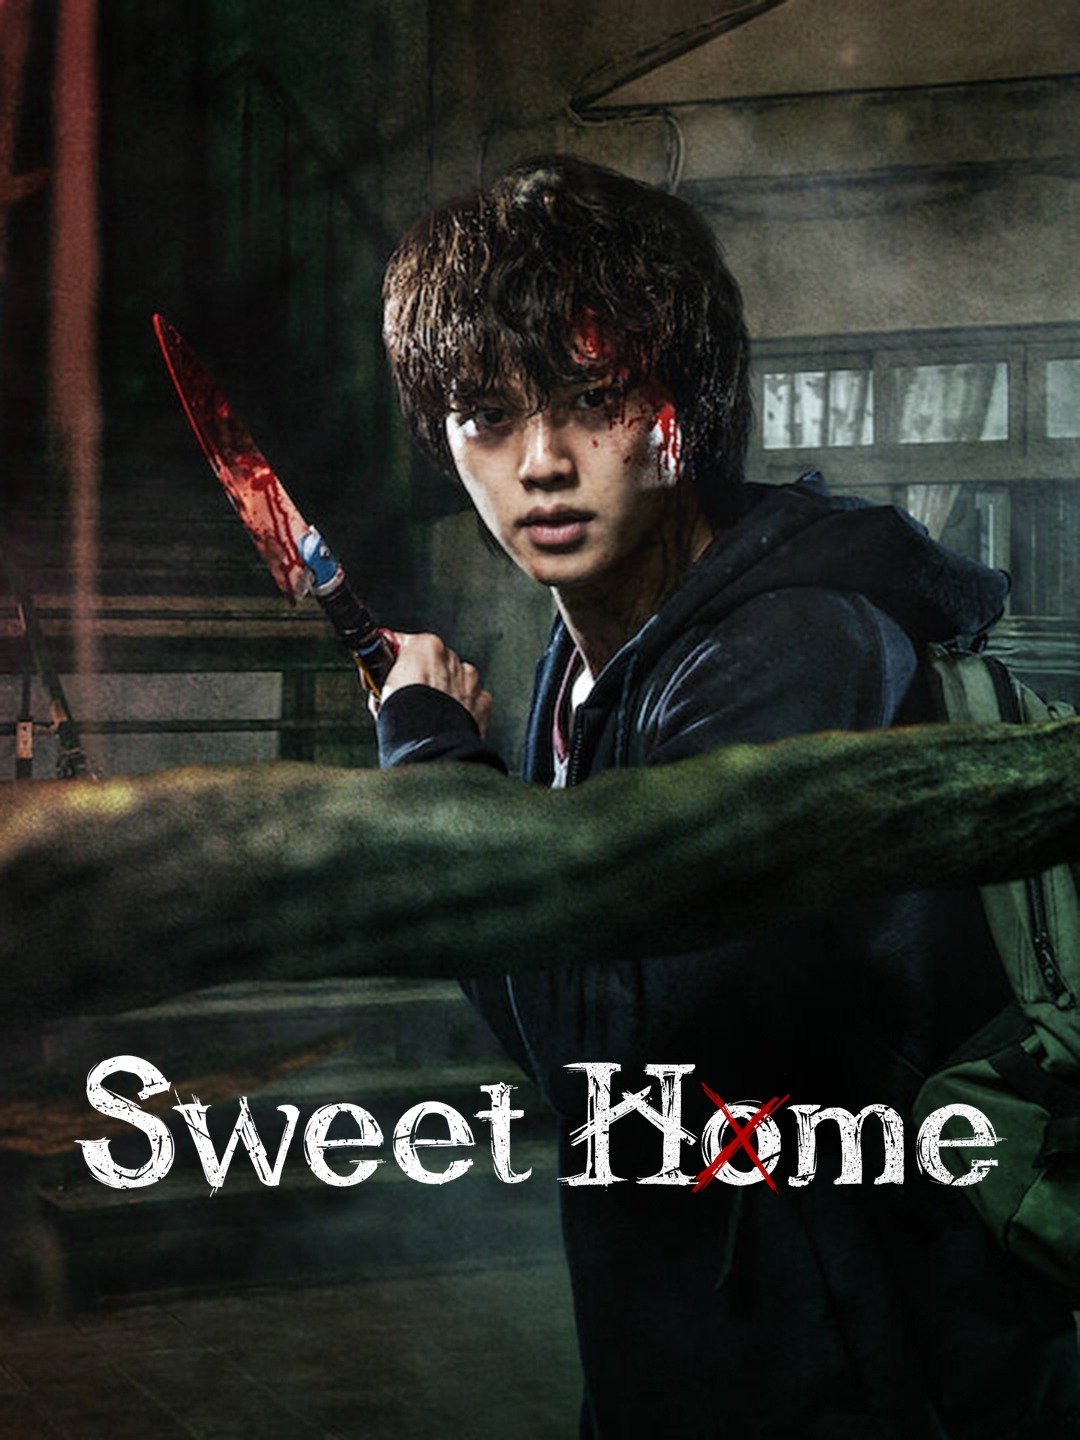 home sweet home alone full movie download in tamil